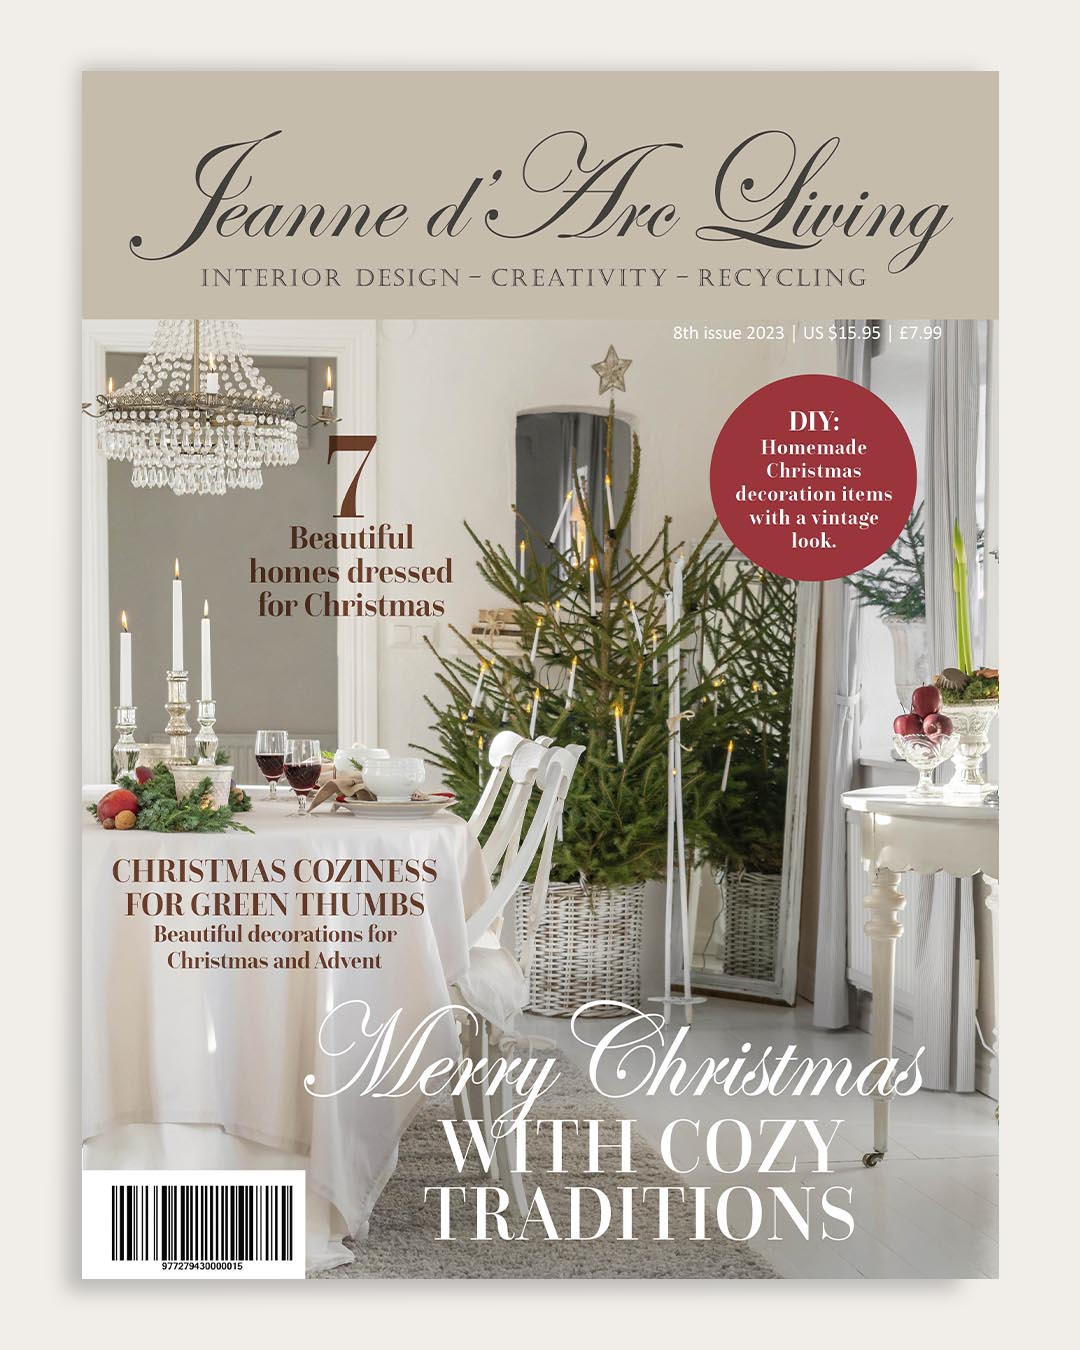 Jeanne d'Arc Living Magazine 8th Issue 2023 Merry Christmas With Cozy Traditions